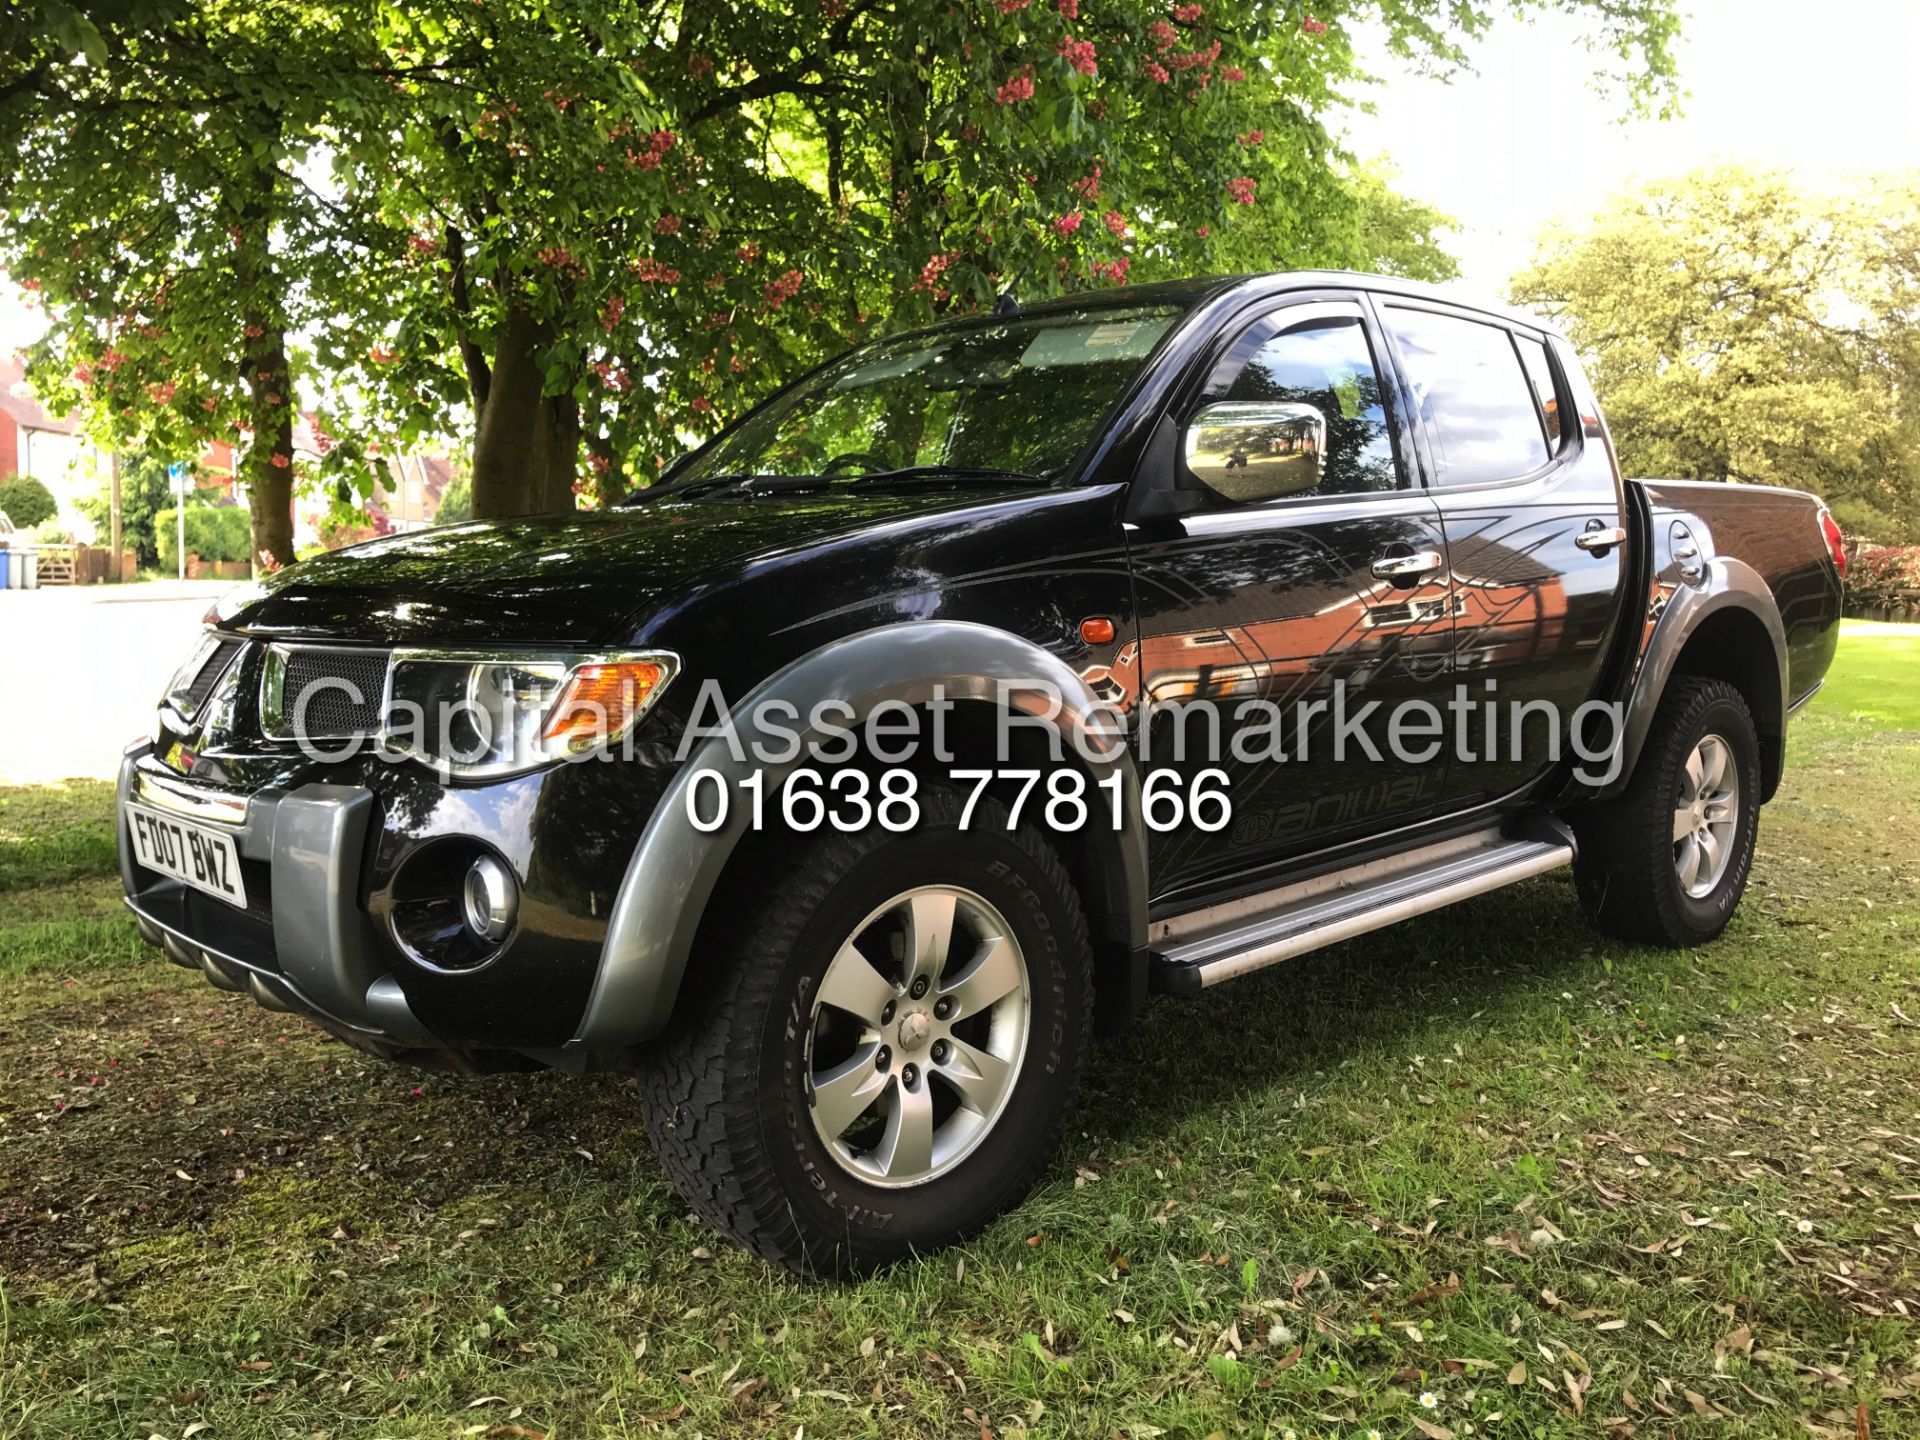 (ON SALE) MITSUBISHI L200 2.5DID "ANIMAL" BLACK EDITION" DC - LOW MILES - LEATHER - HUGE SPEC - WOW!